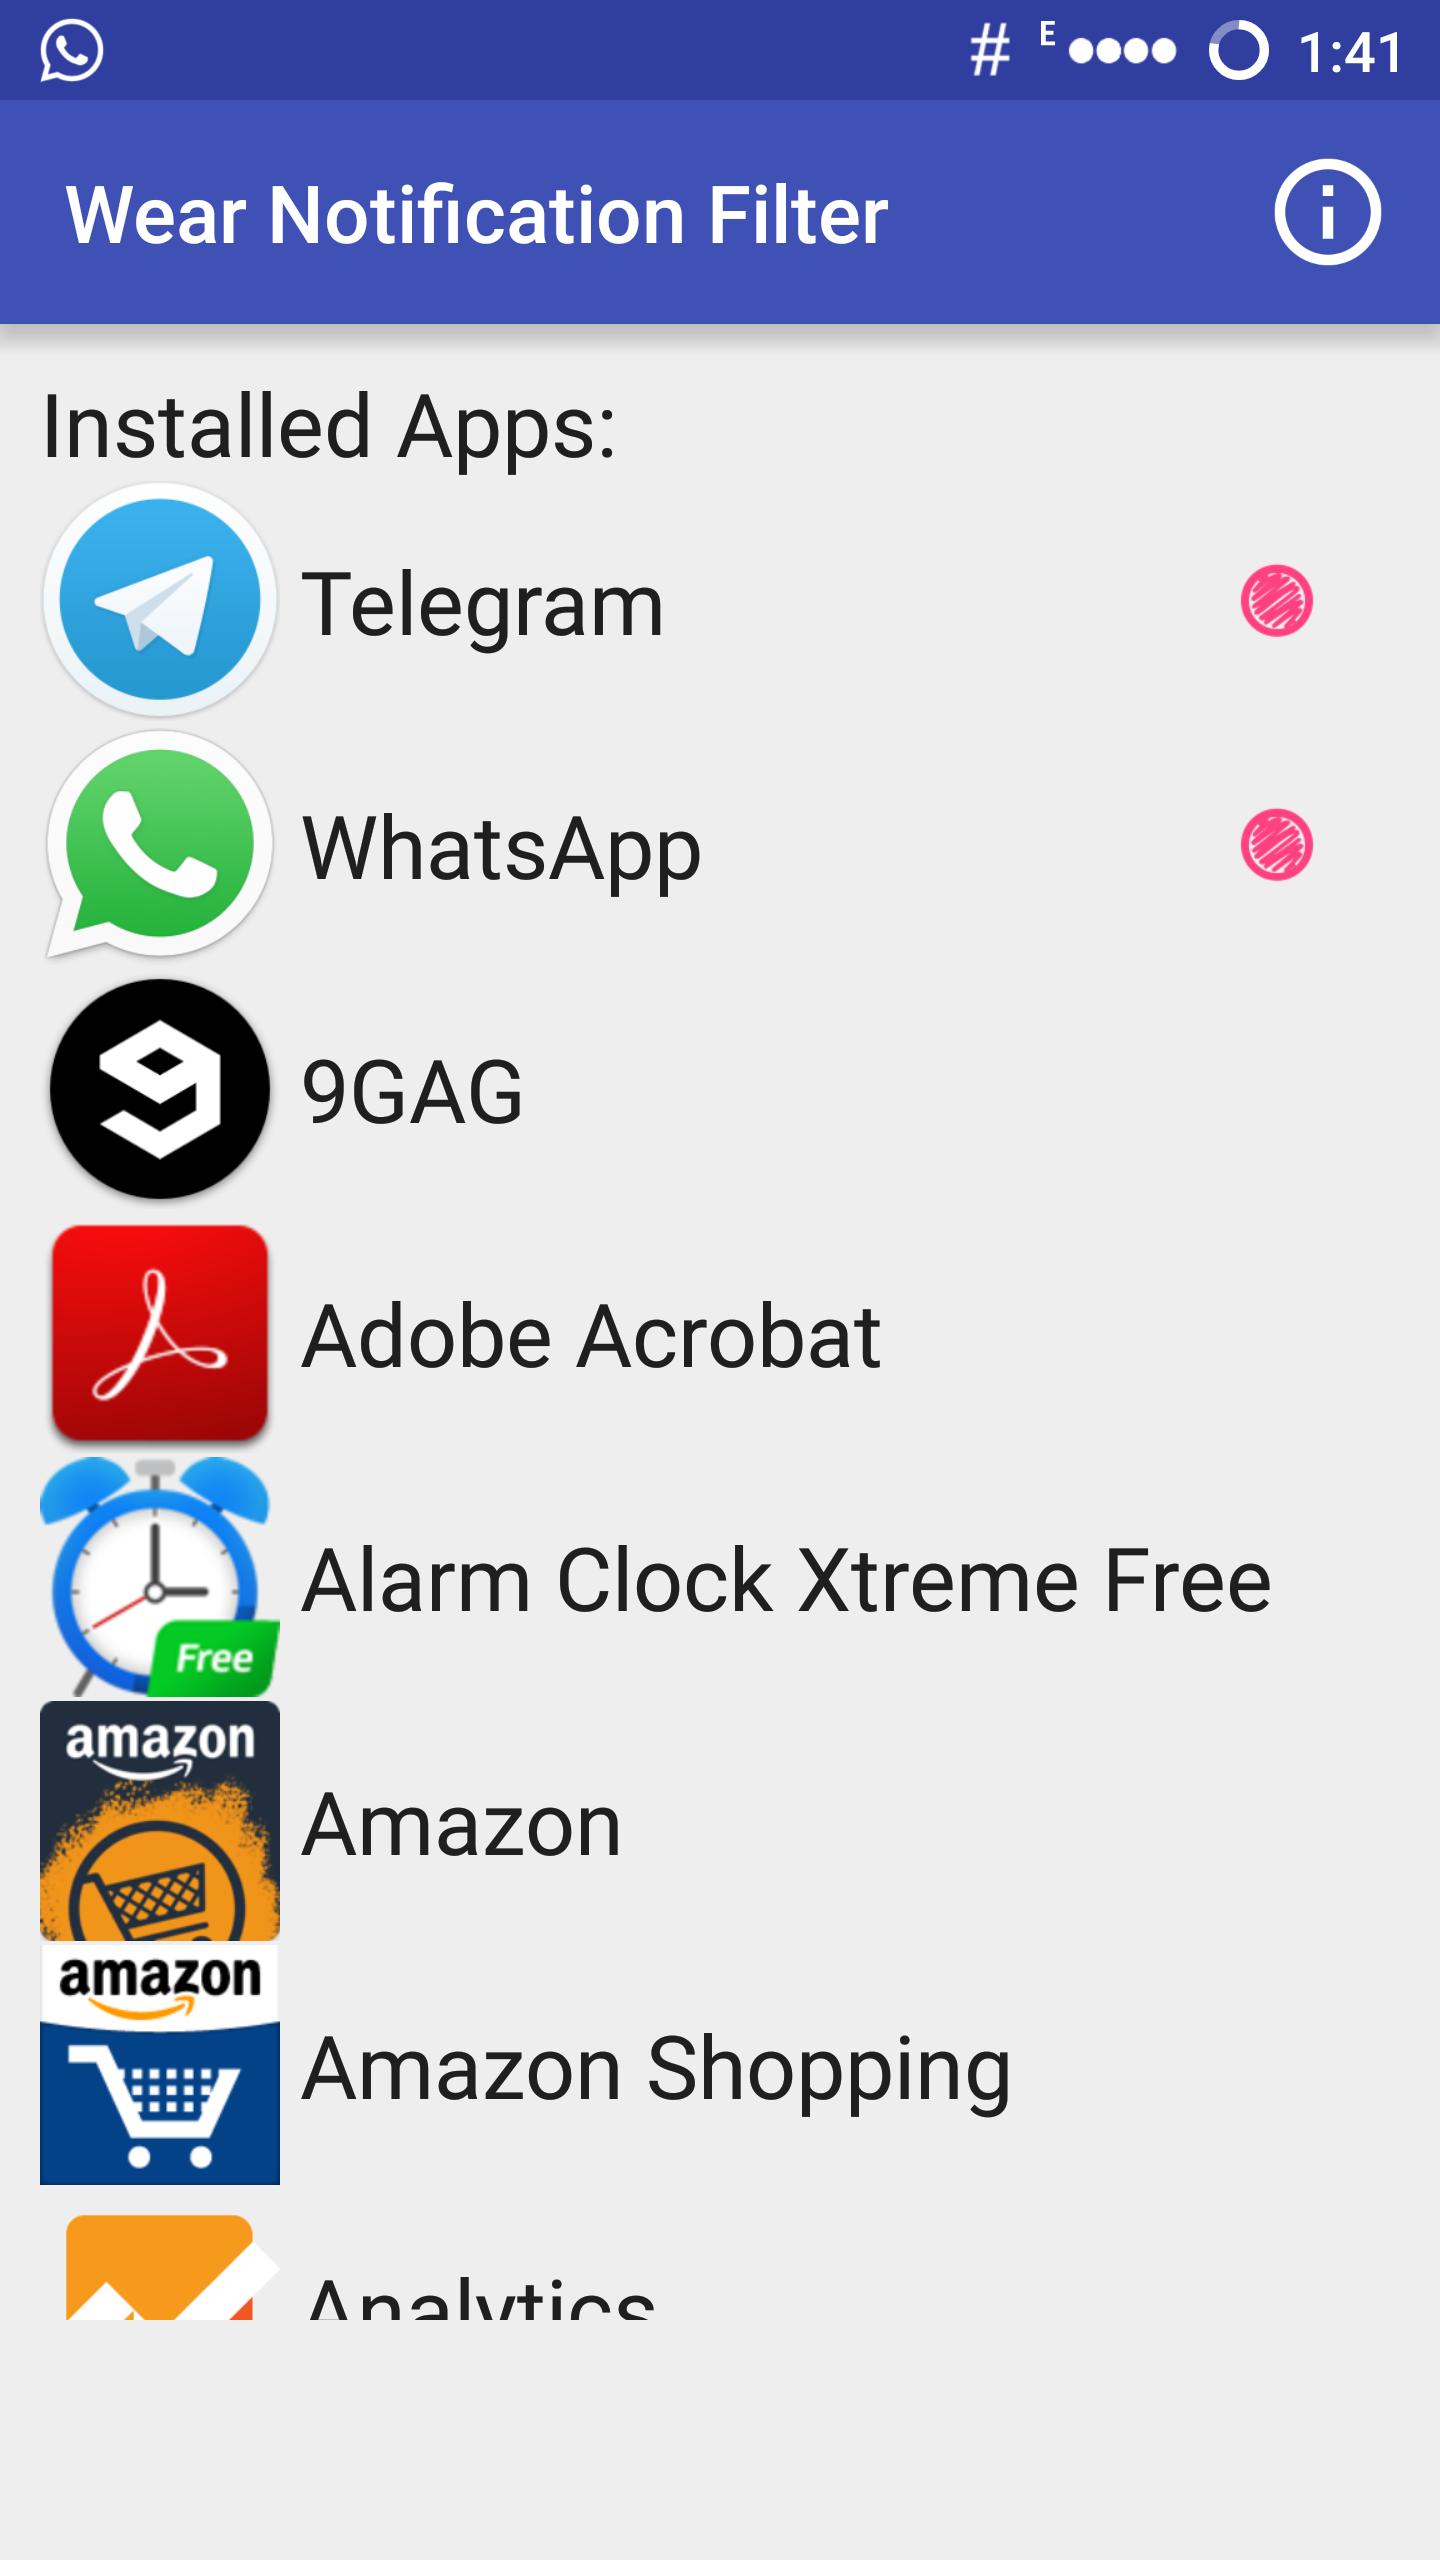 Wear Notification Filter for Android - APK Download